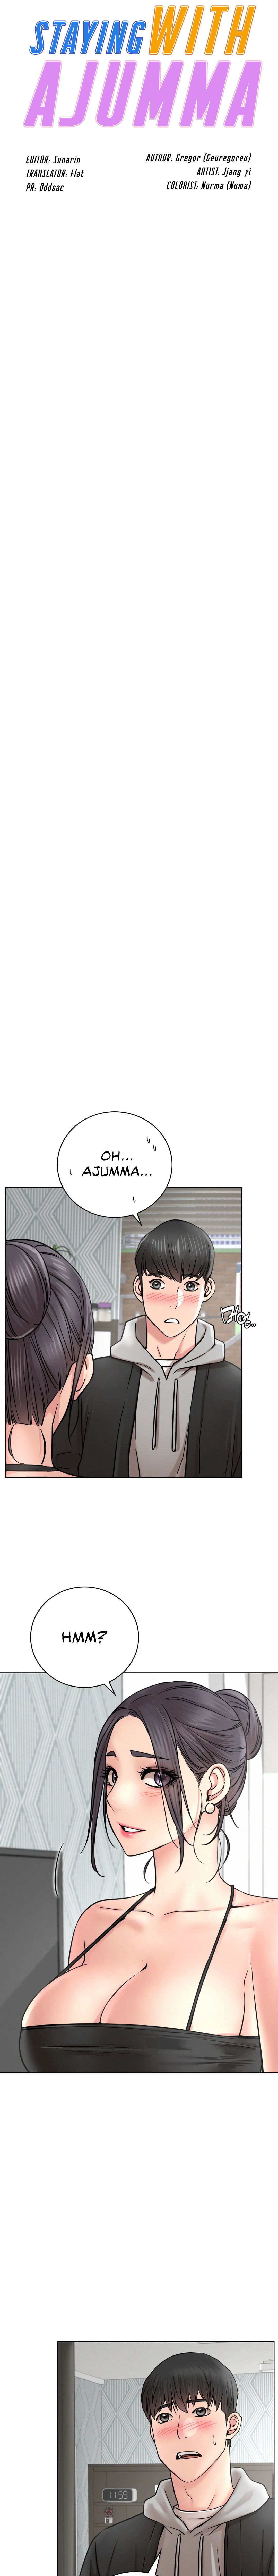 Staying with Ajumma - Chapter 56 Page 3